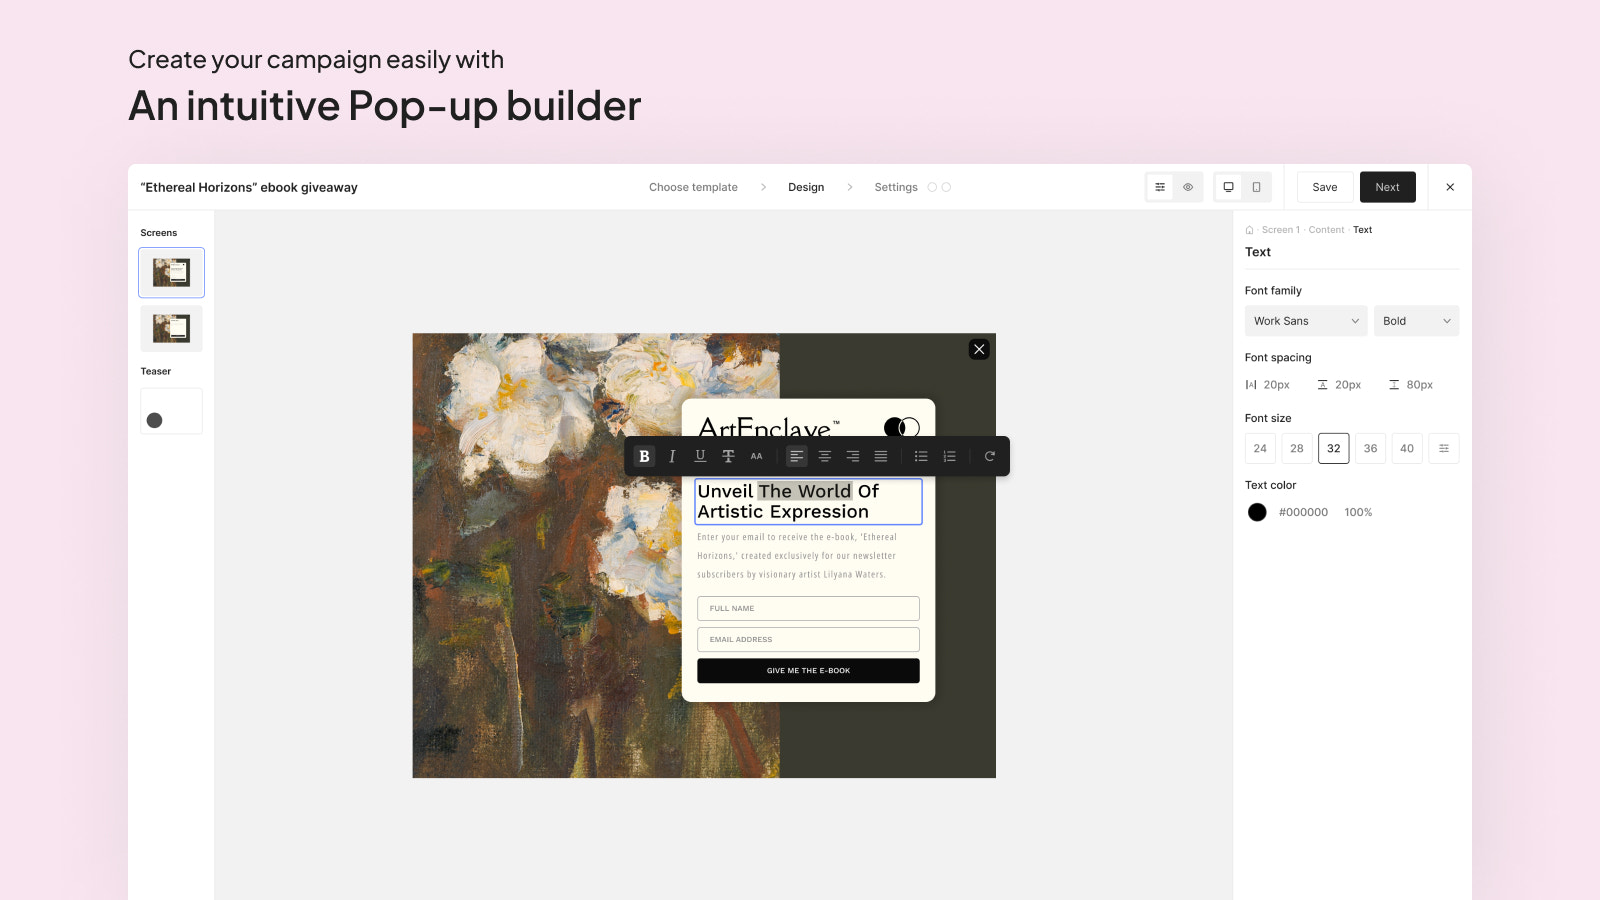 Easily create your campaigns with an intuitive popup builder